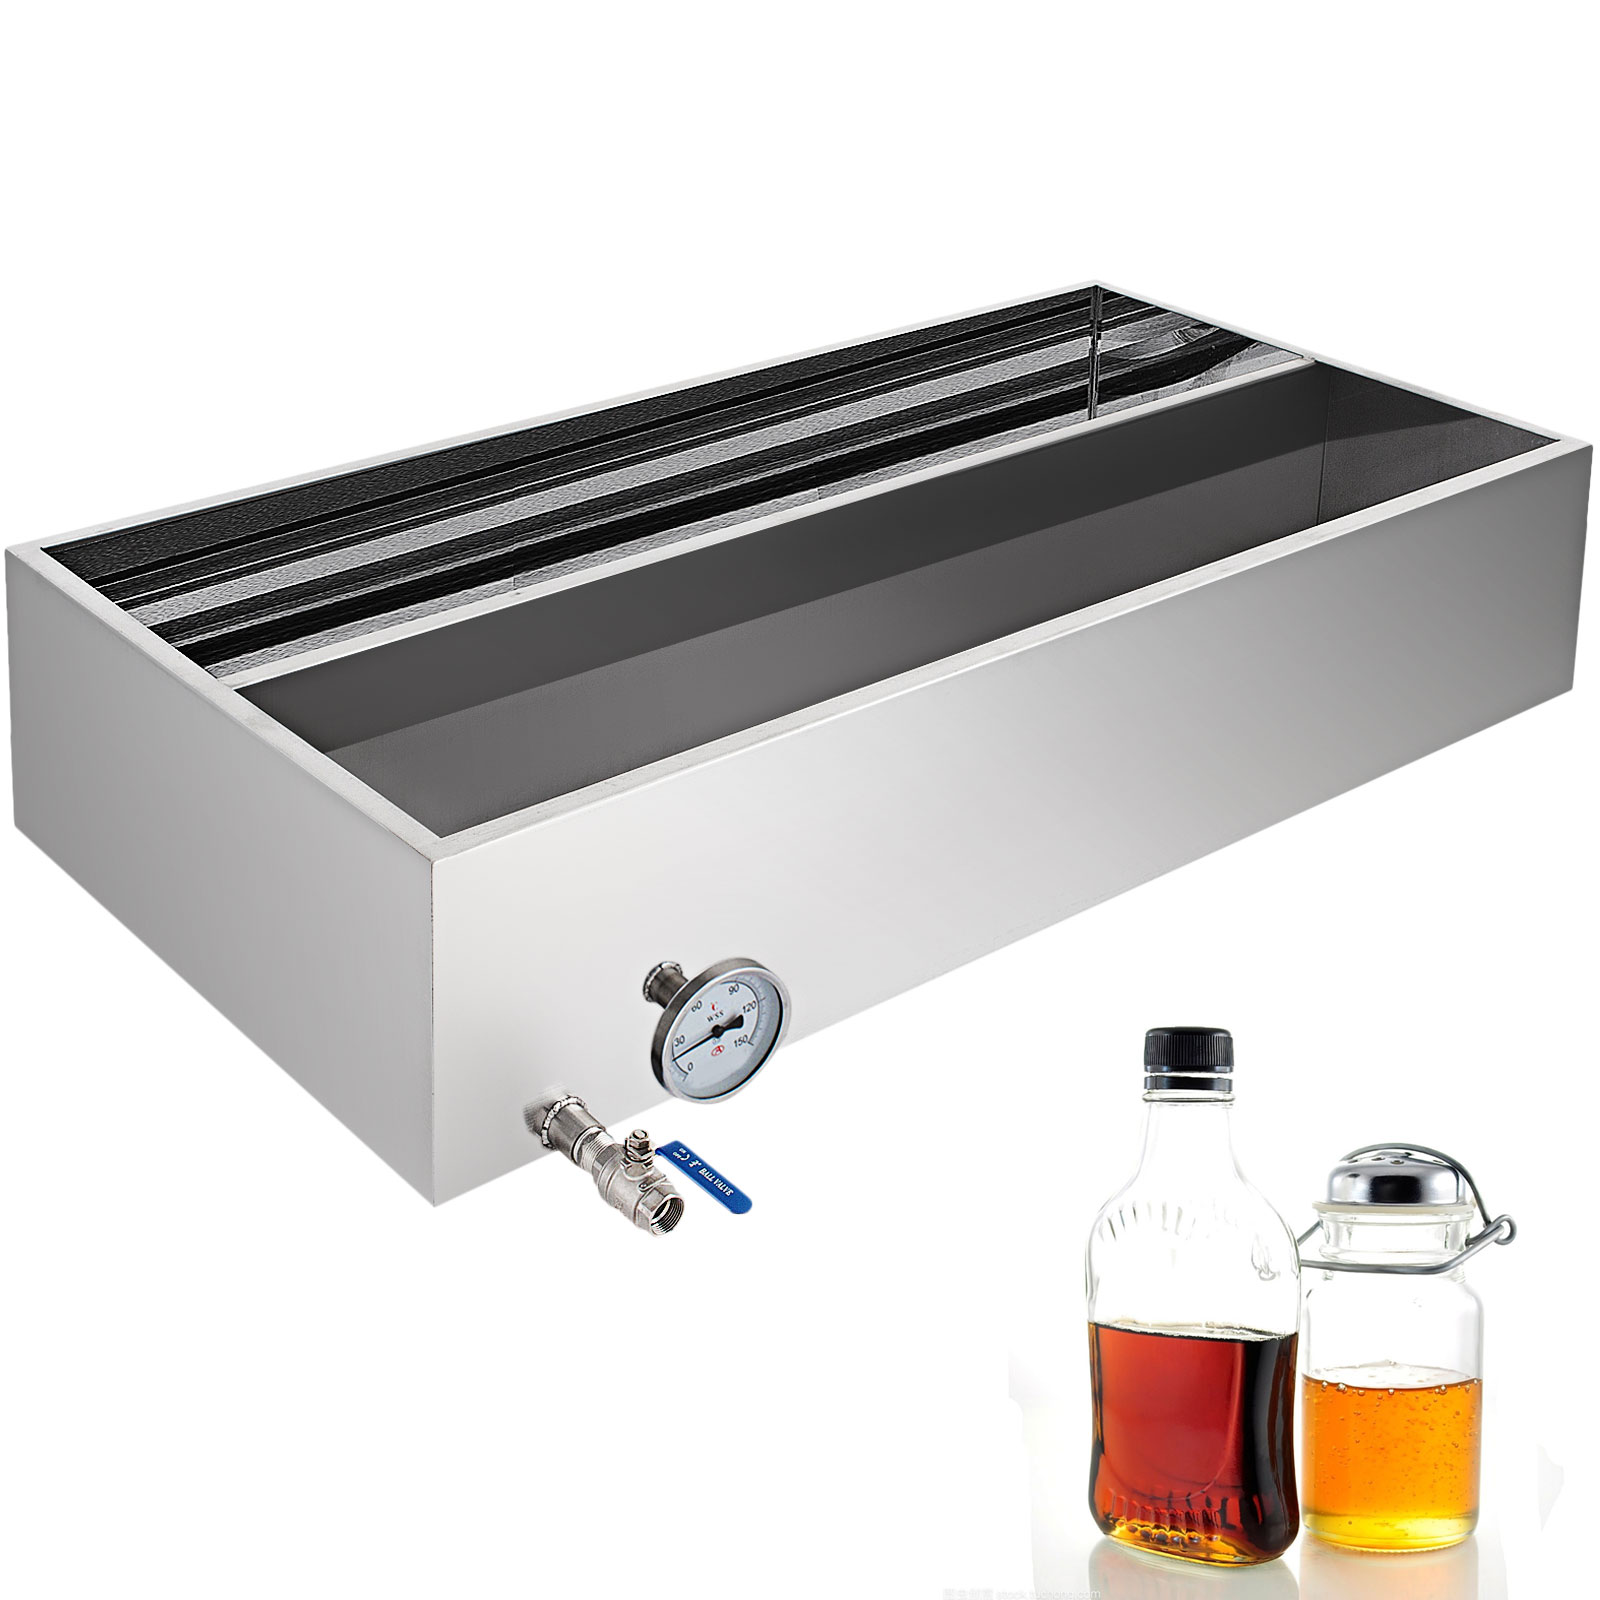 maple syrup evaporator pan, stainless steel, 30x16x18.9 inch